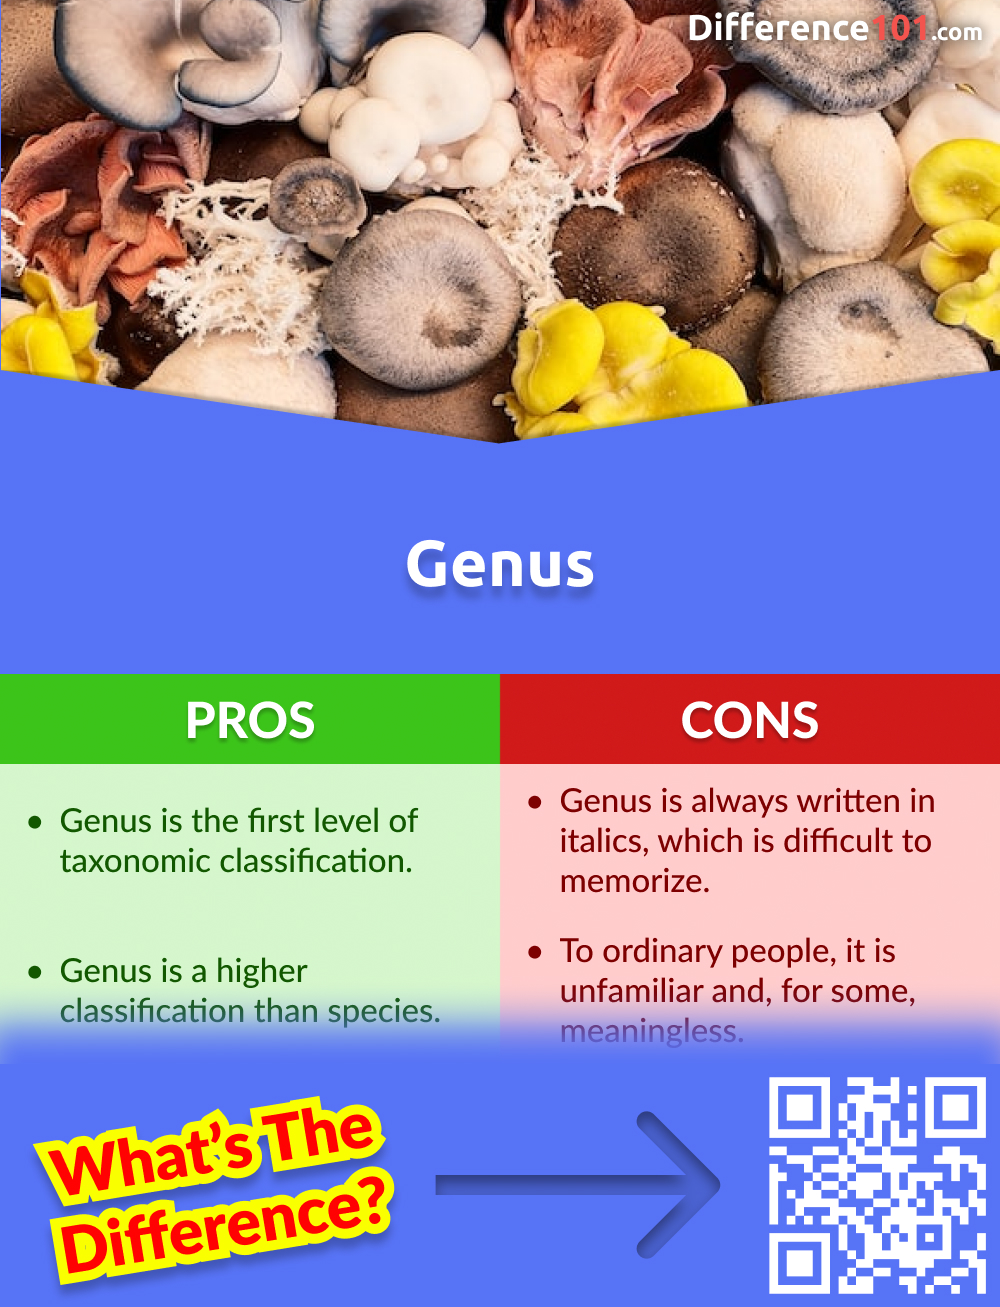 Pros and Cons of Genus